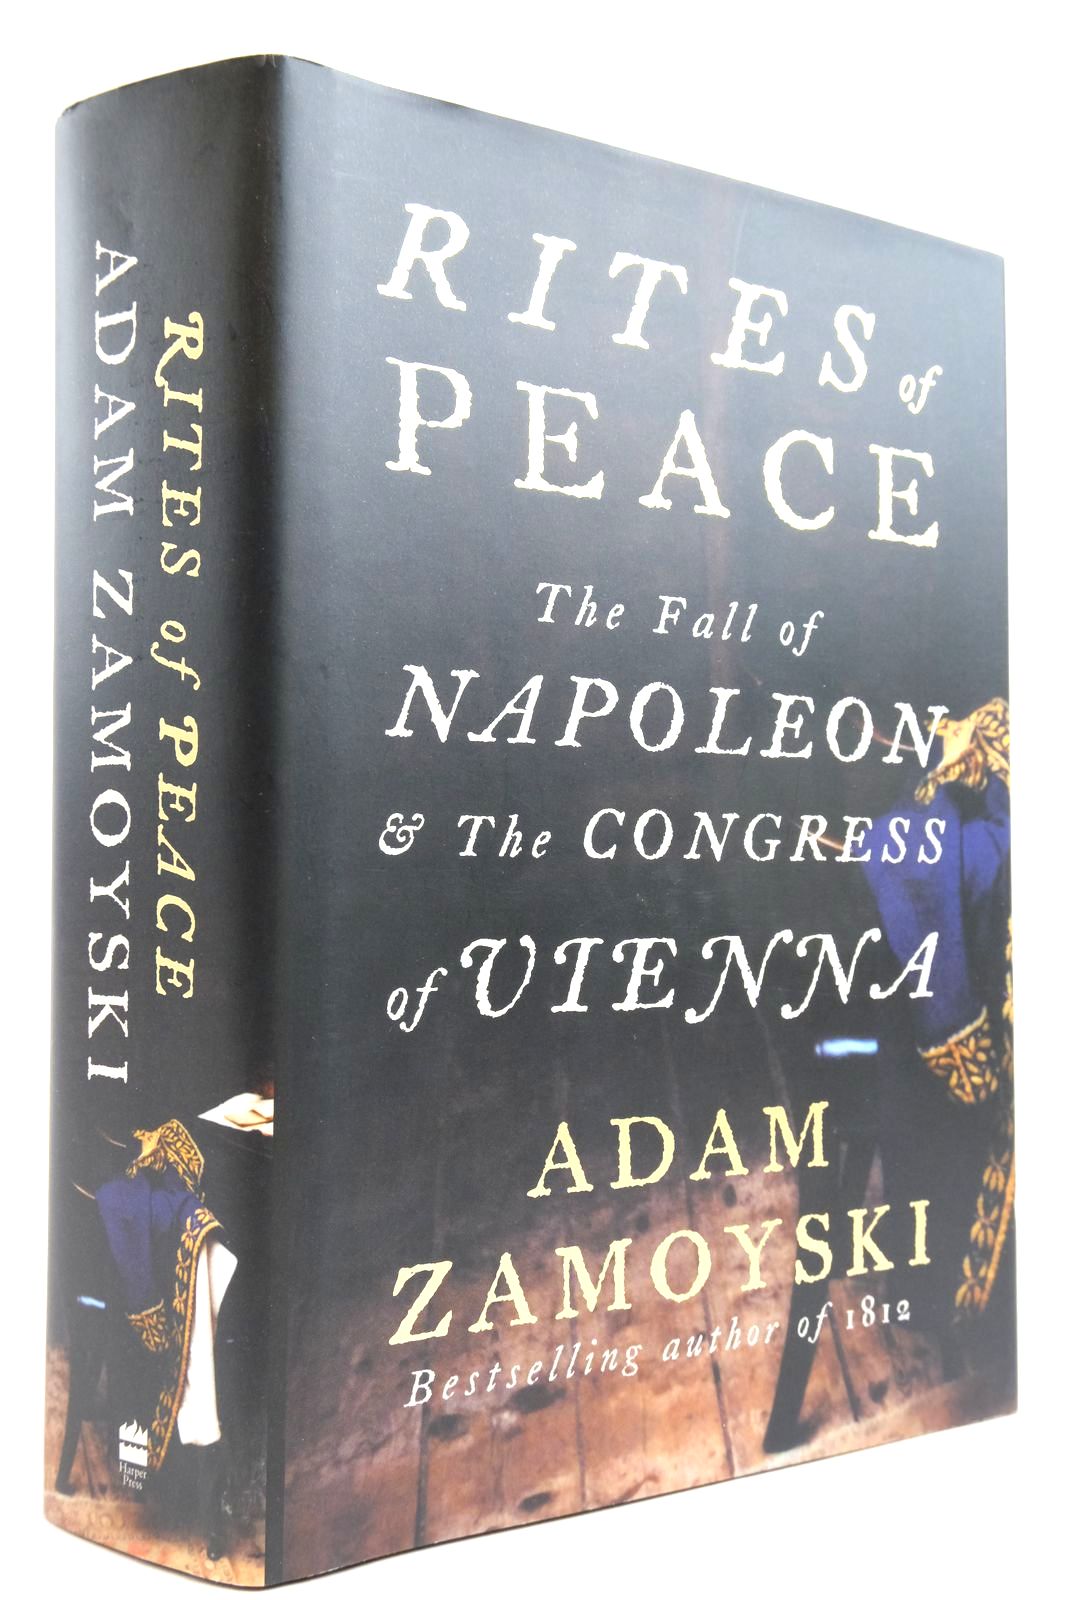 Photo of RITES OF PEACE THE FALL OF NAPOLEON & THE CONGRESS OF VIENNA written by Zamoyski, Adam published by Harper Press (STOCK CODE: 2135394)  for sale by Stella & Rose's Books